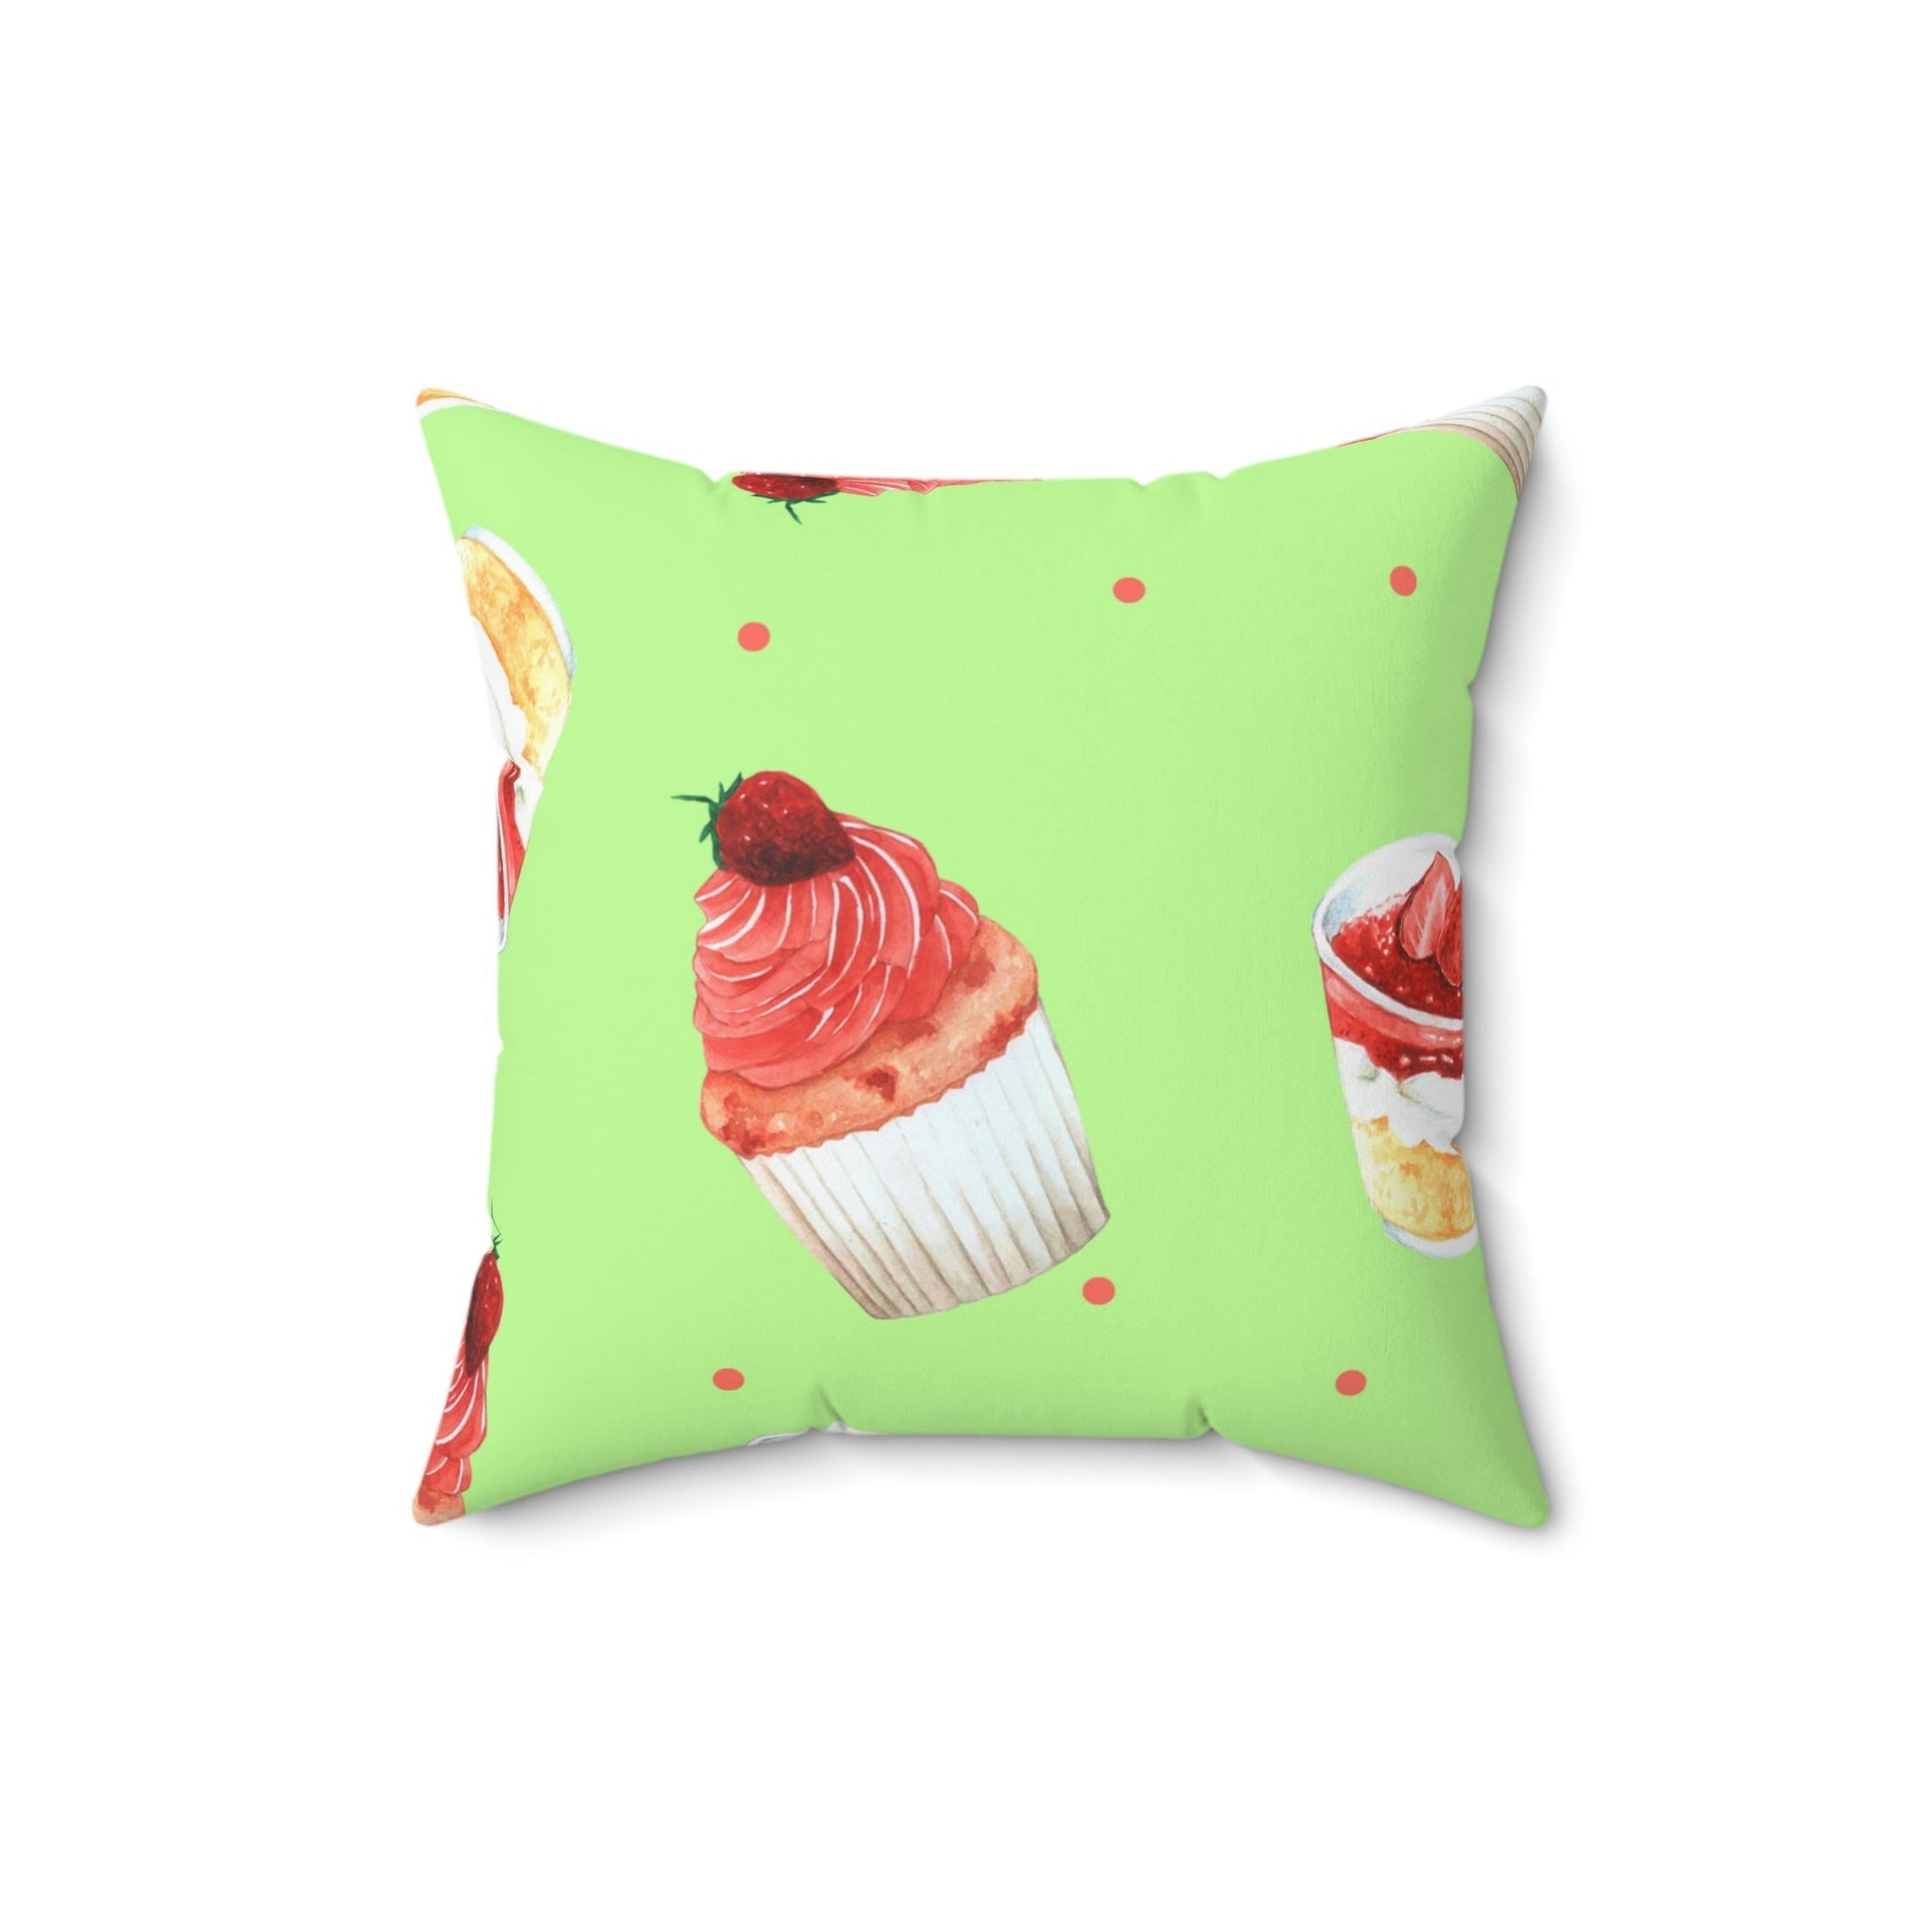 Mini Starwberry Shortcakes Square Pillow Home Decor Pink Sweetheart